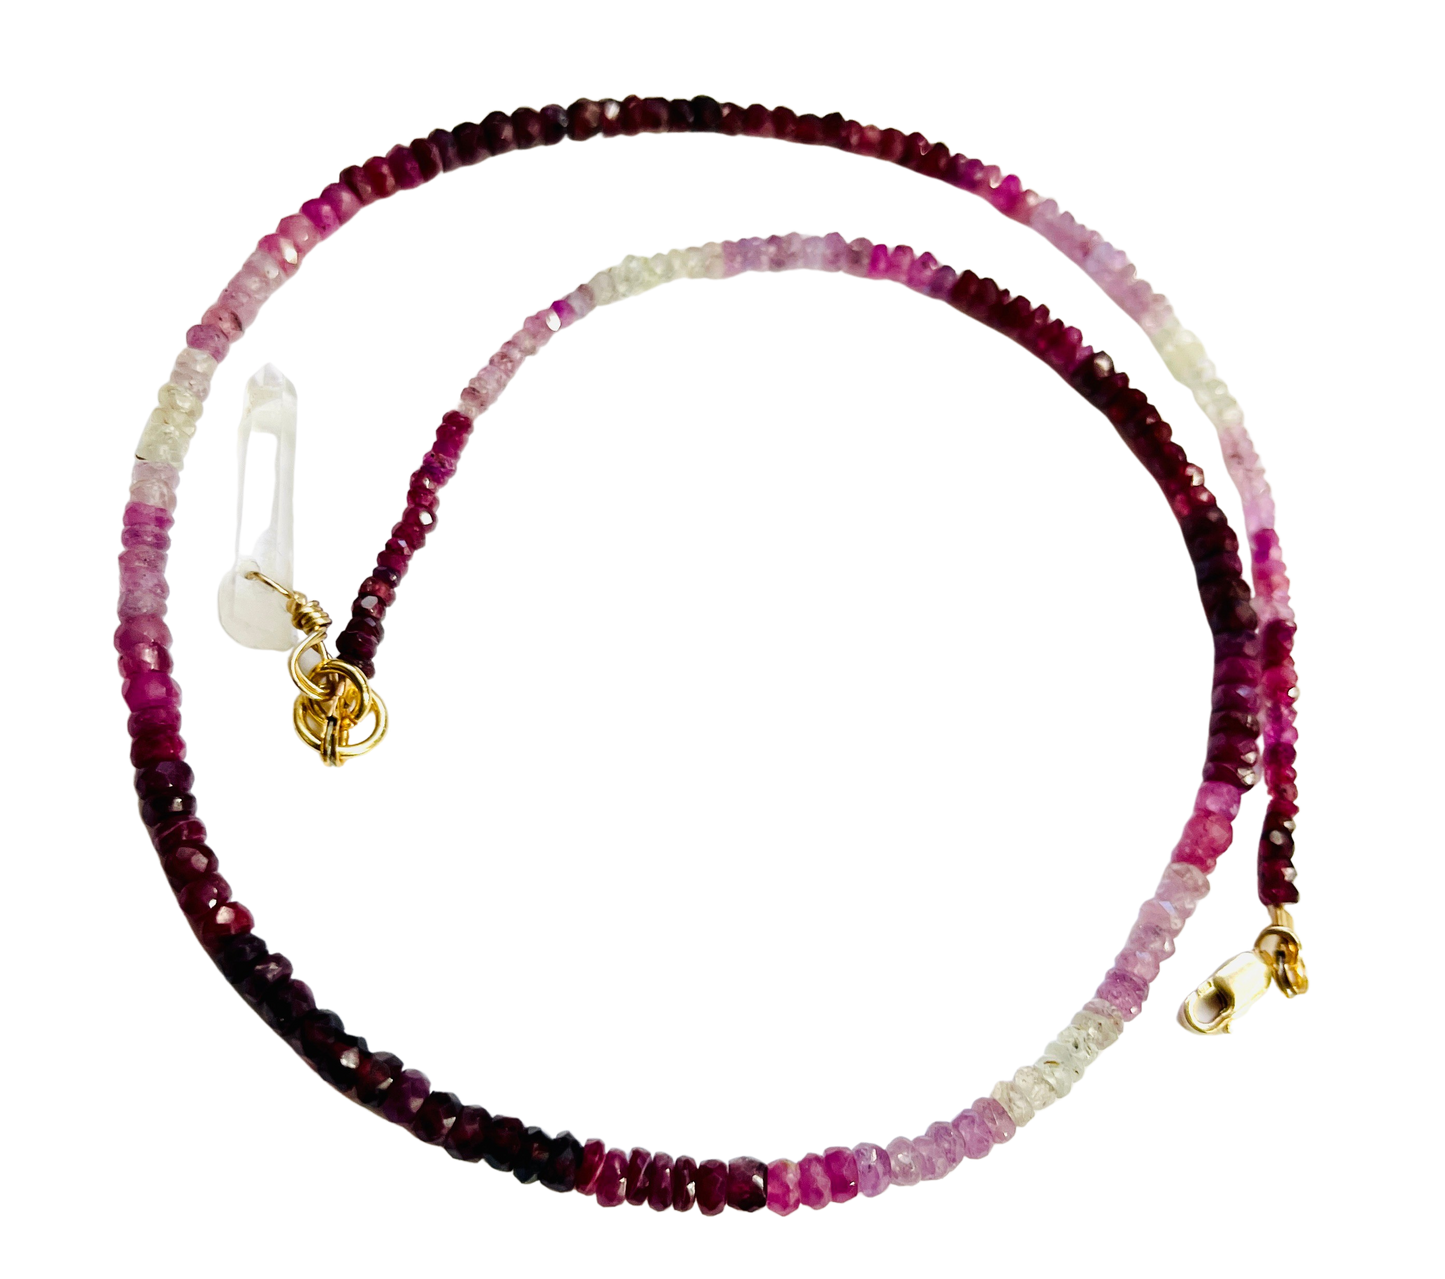 Genuine Ruby Ombre Necklace